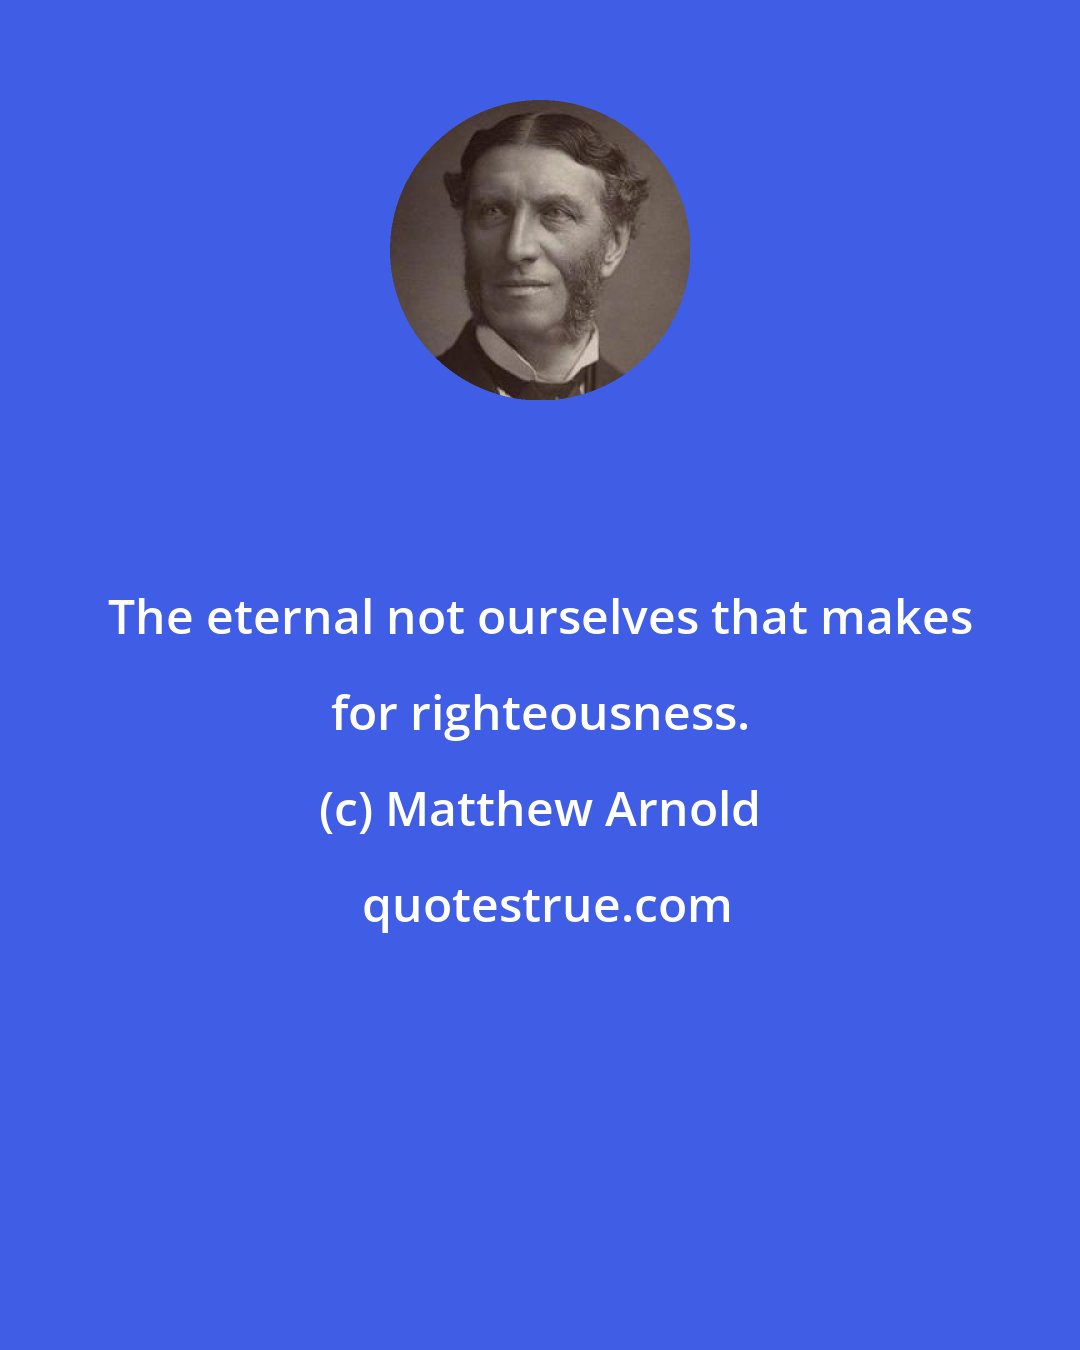 Matthew Arnold: The eternal not ourselves that makes for righteousness.